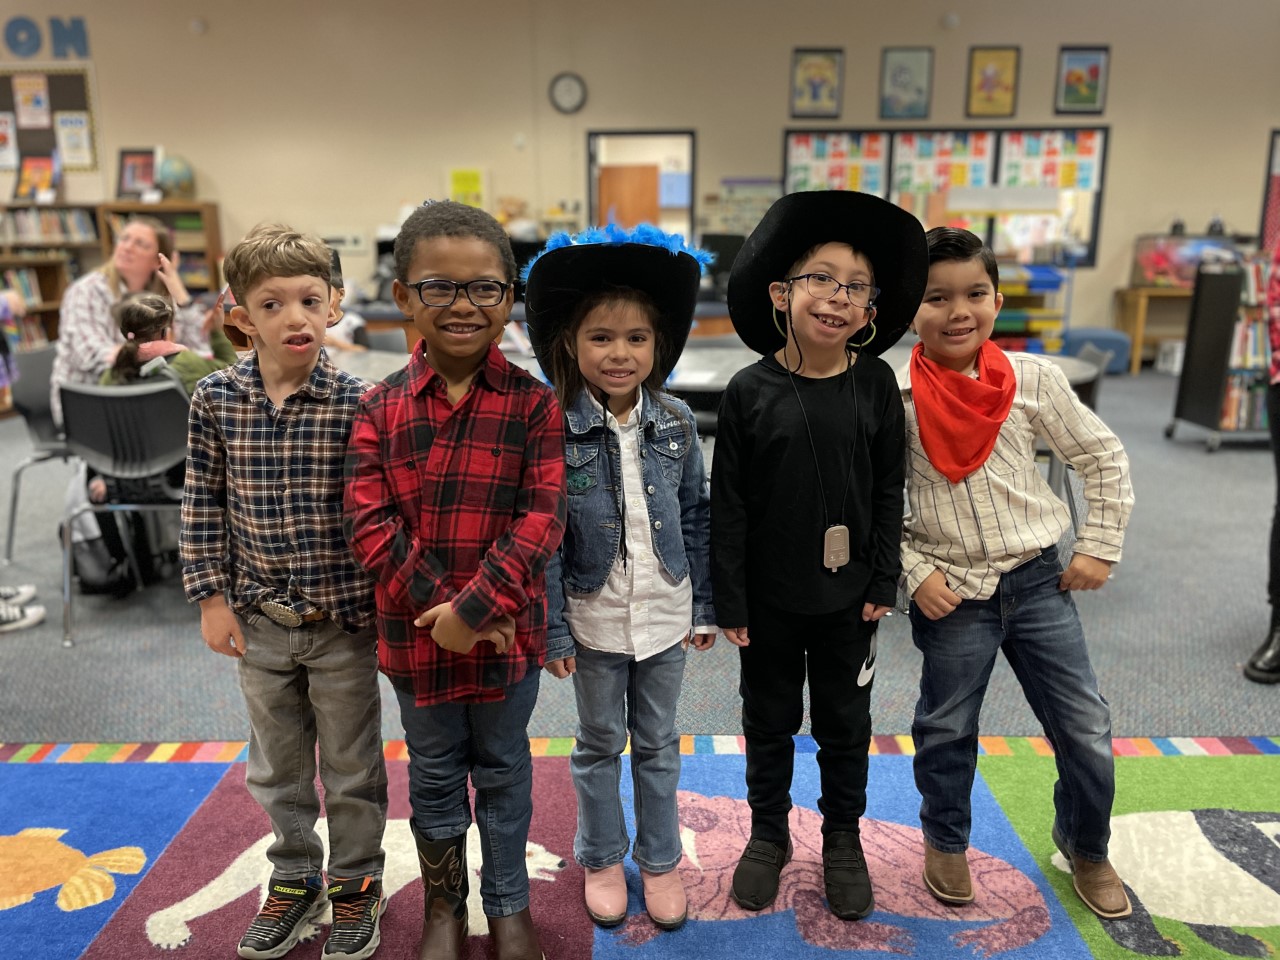 Students at Houser wore their western gear.